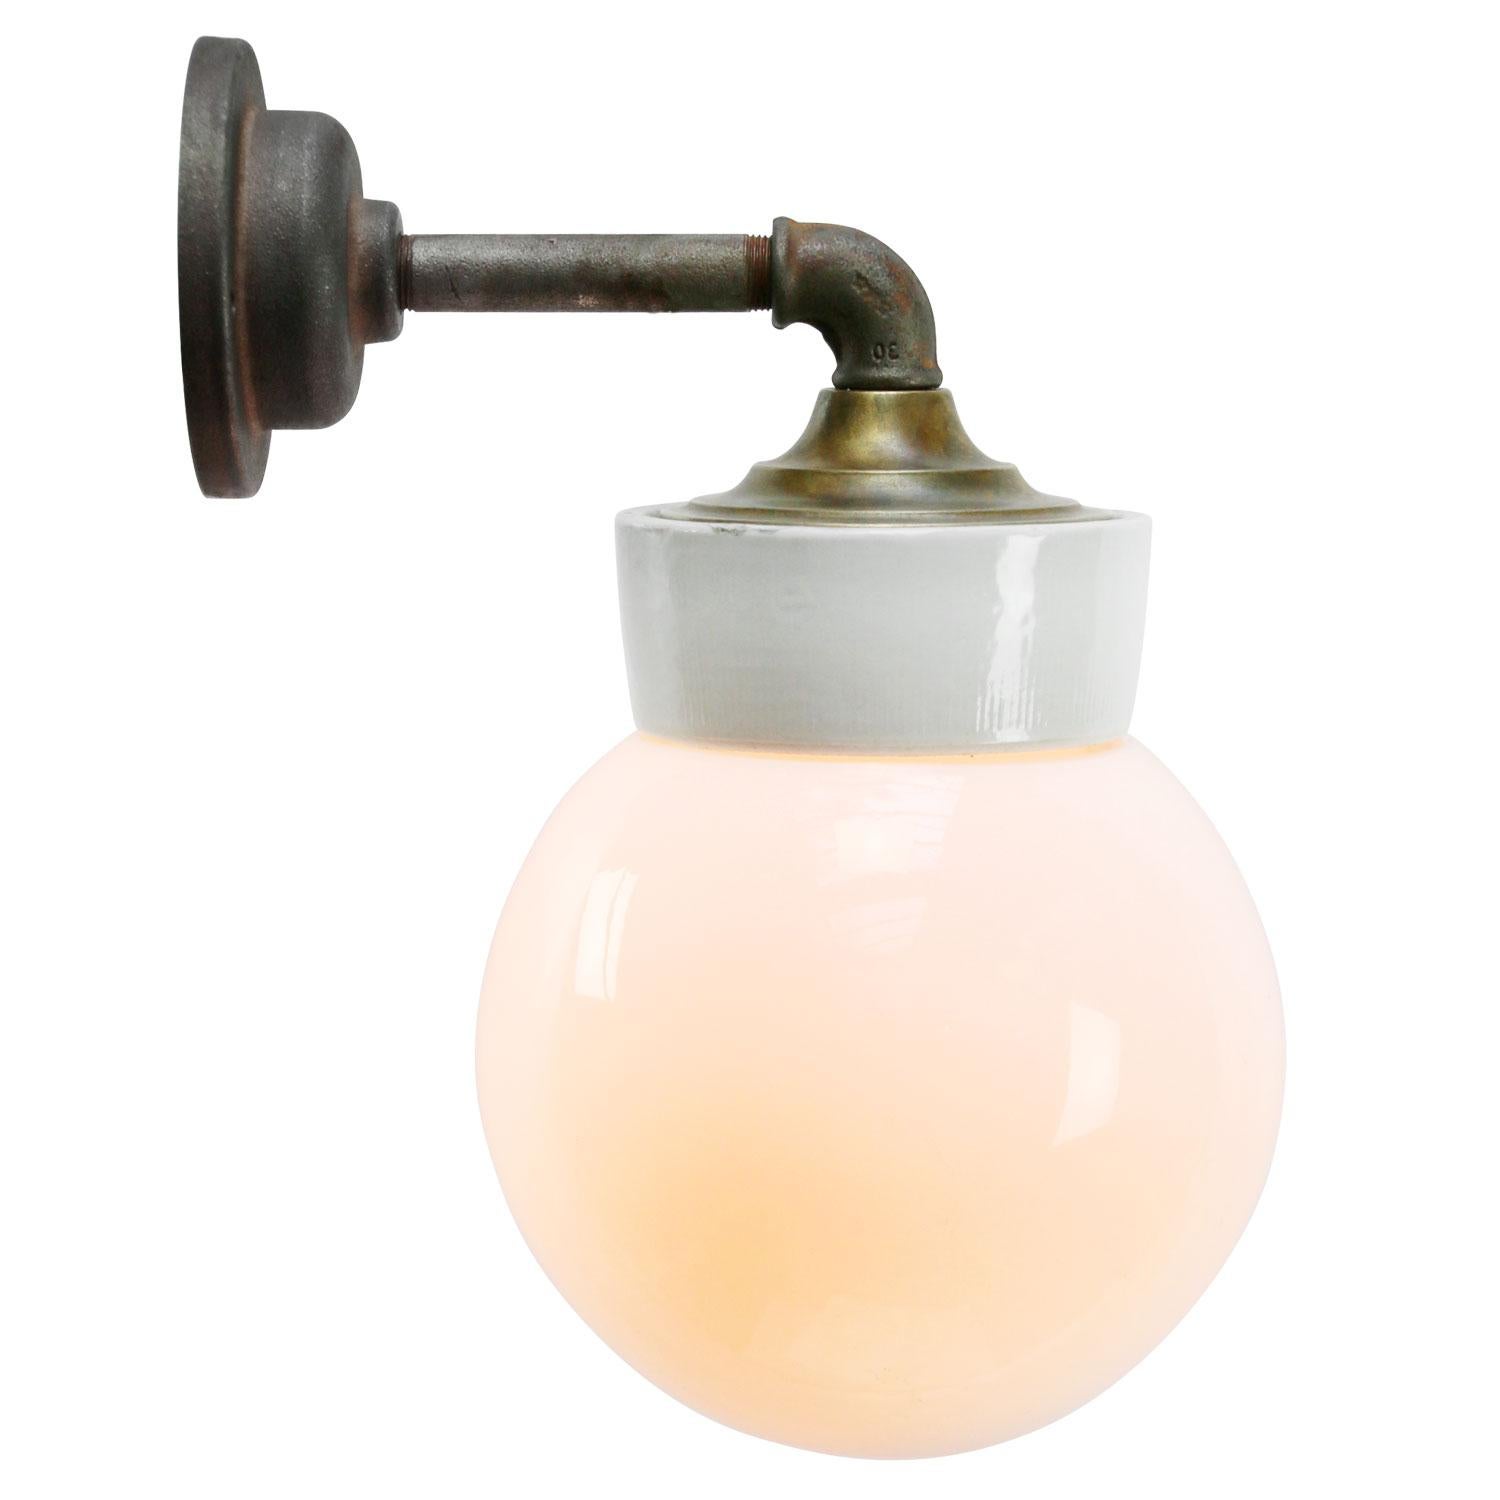 Porcelain Industrial wall lamp.
White porcelain, brass and cast iron
Opaline Milk glass.
2 conductors, no ground.

Diameter cast iron wall piece 10 cm. 2 holes to secure.

Weight: 2.25 kg / 5 lb

Priced per individual item. All lamps have